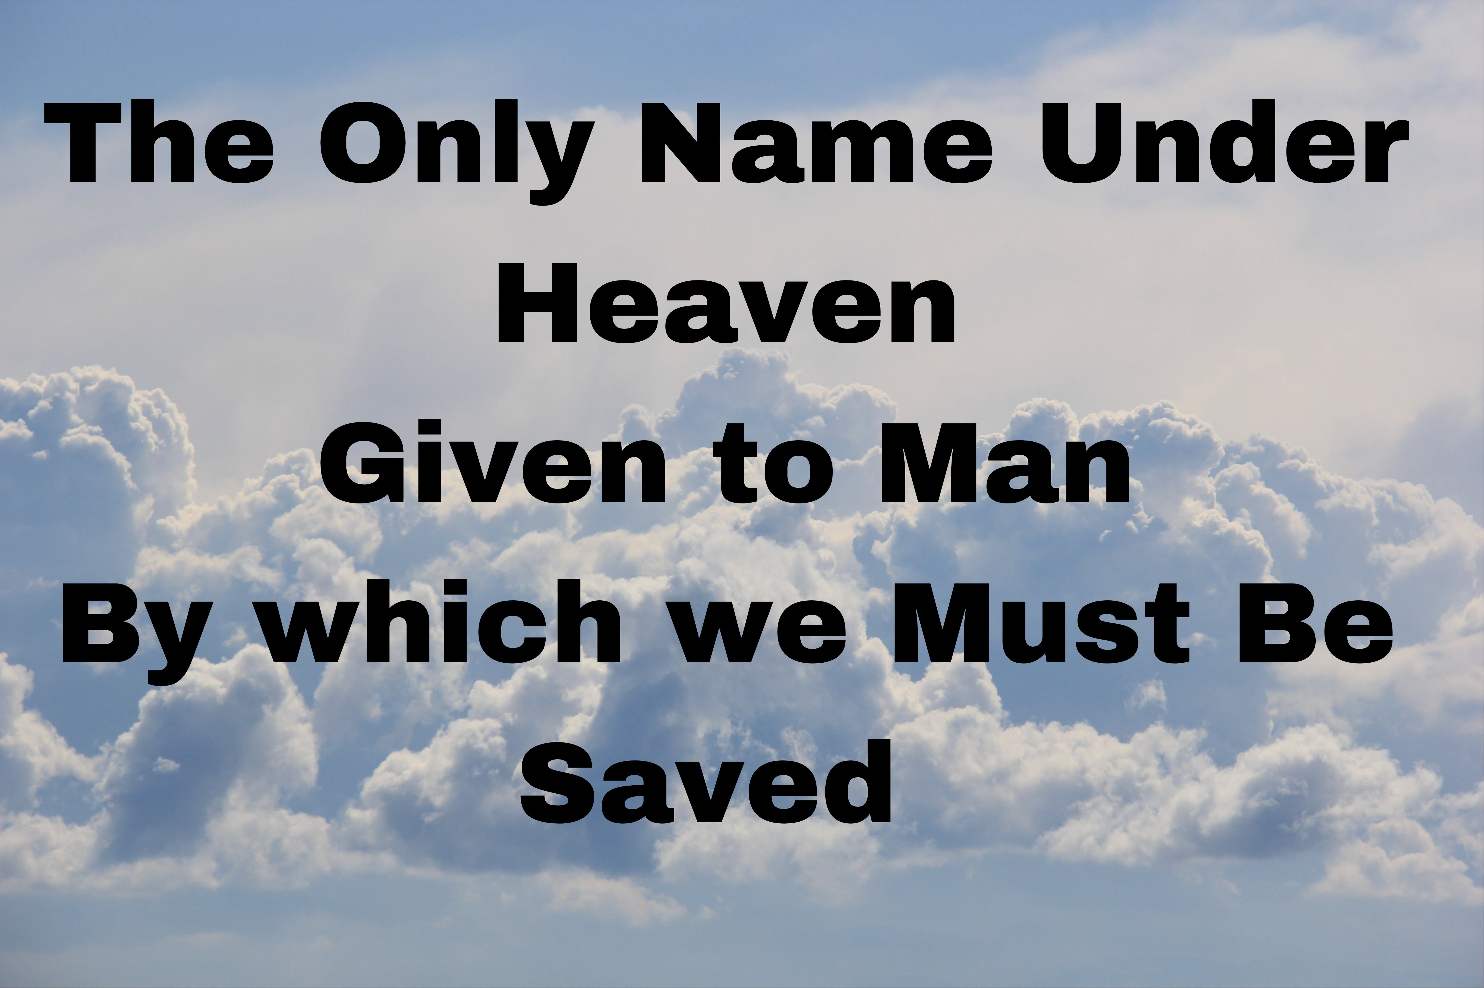 The Only Name Under Heaven